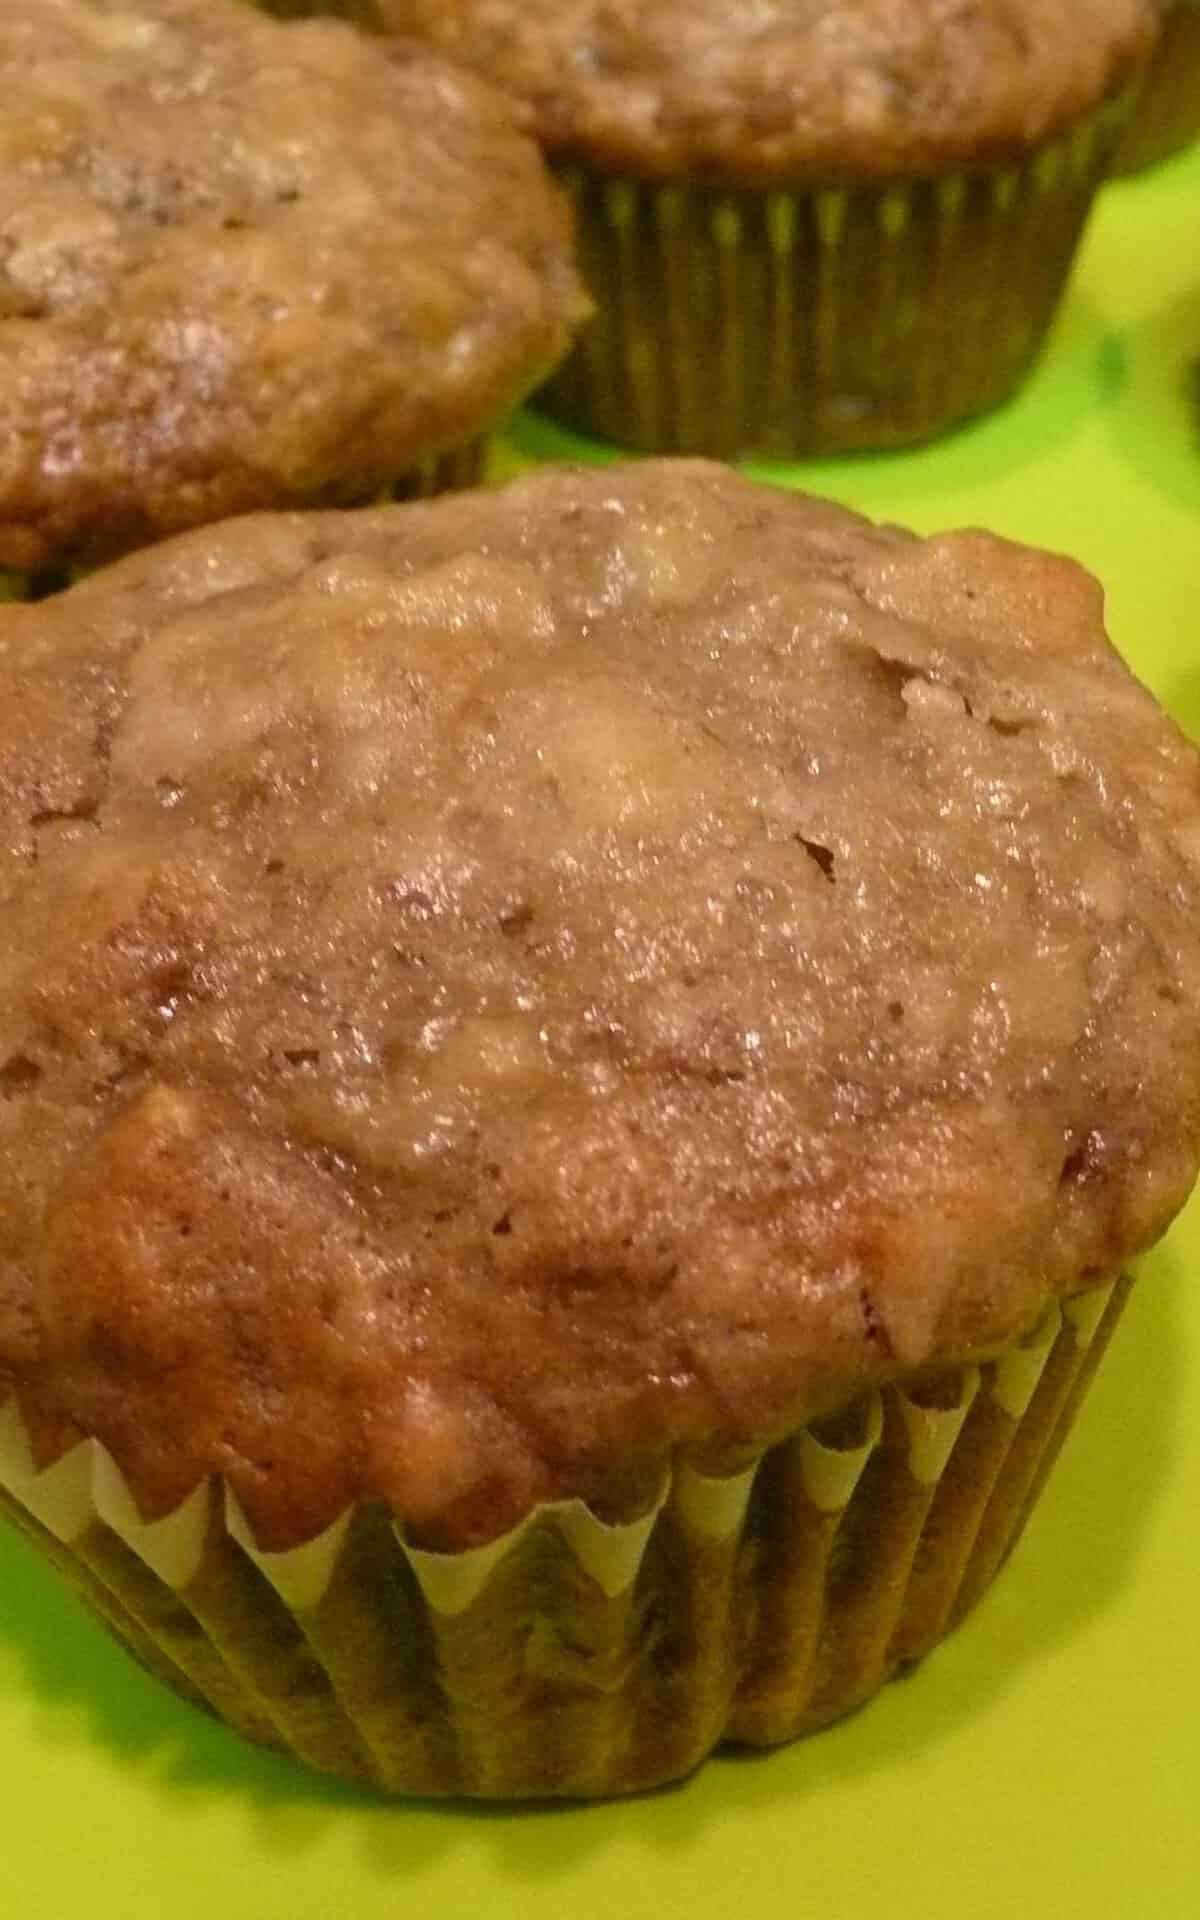 Delicious and Healthy Banana Muffin Recipe